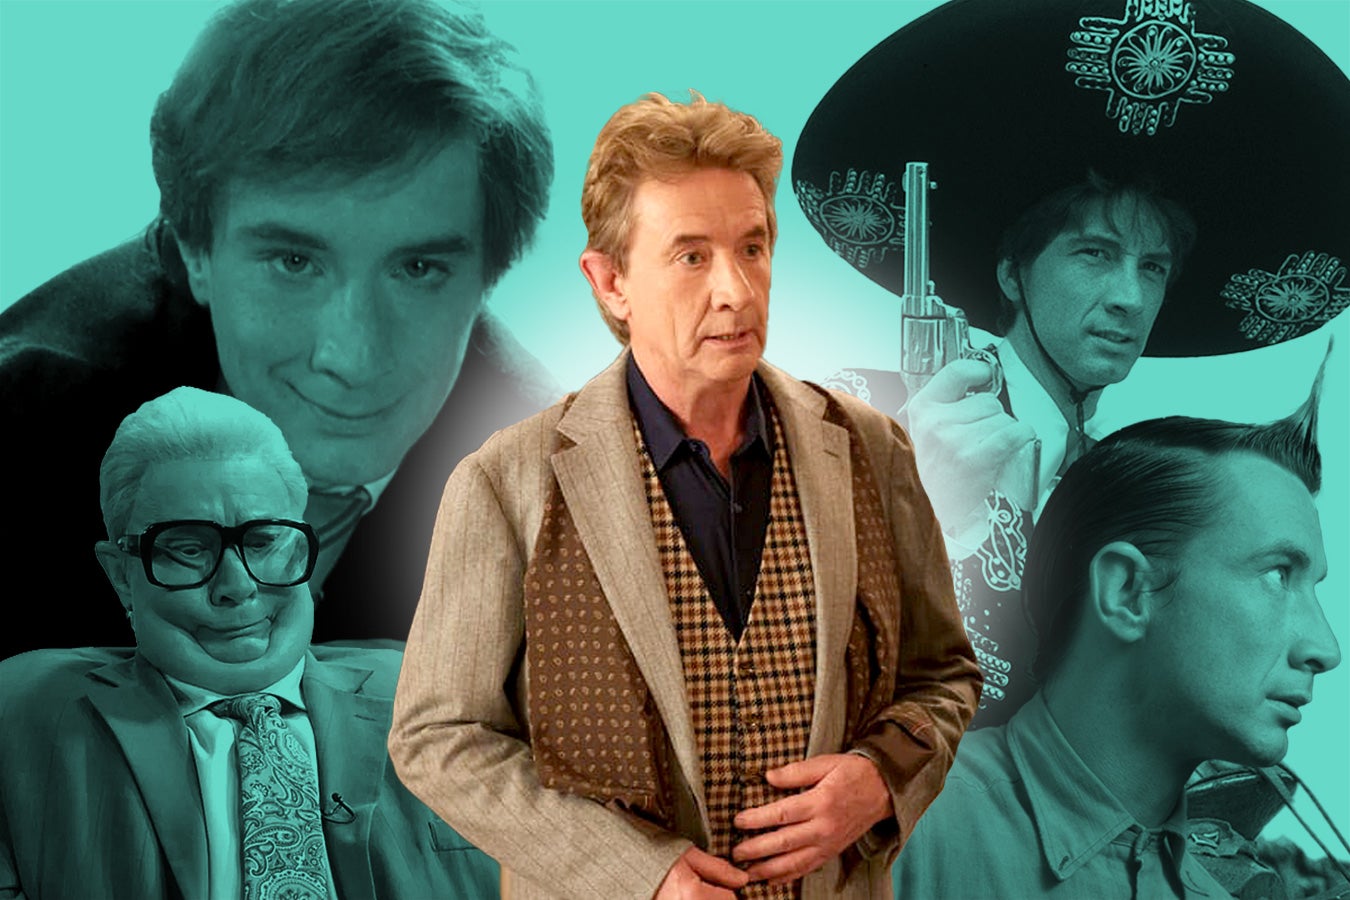 A collection of Martin Short's characters over the years: Oliver Putnam over a green-tinted background of Jiminy Glick, Ed Grimley, and others.